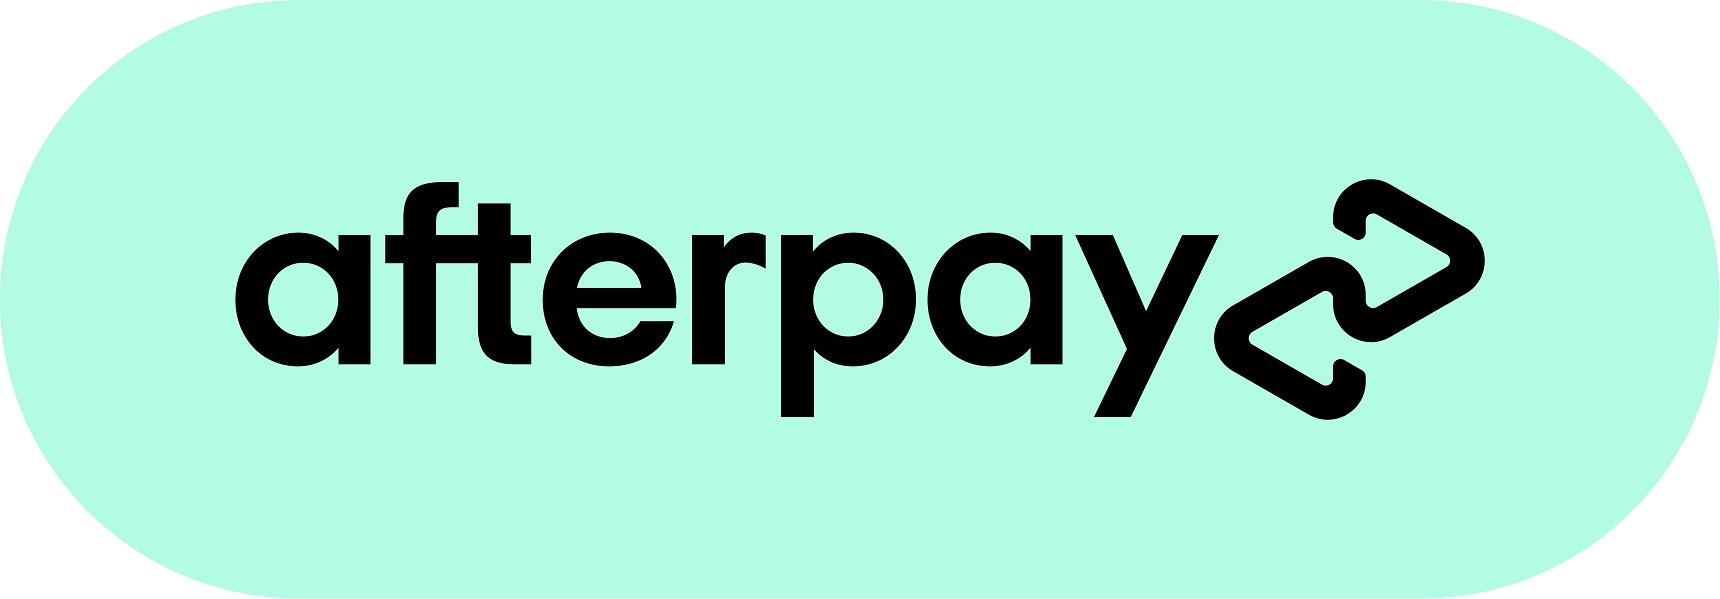 Afterpay At Anaconda - Online Purchases Made Easier ...